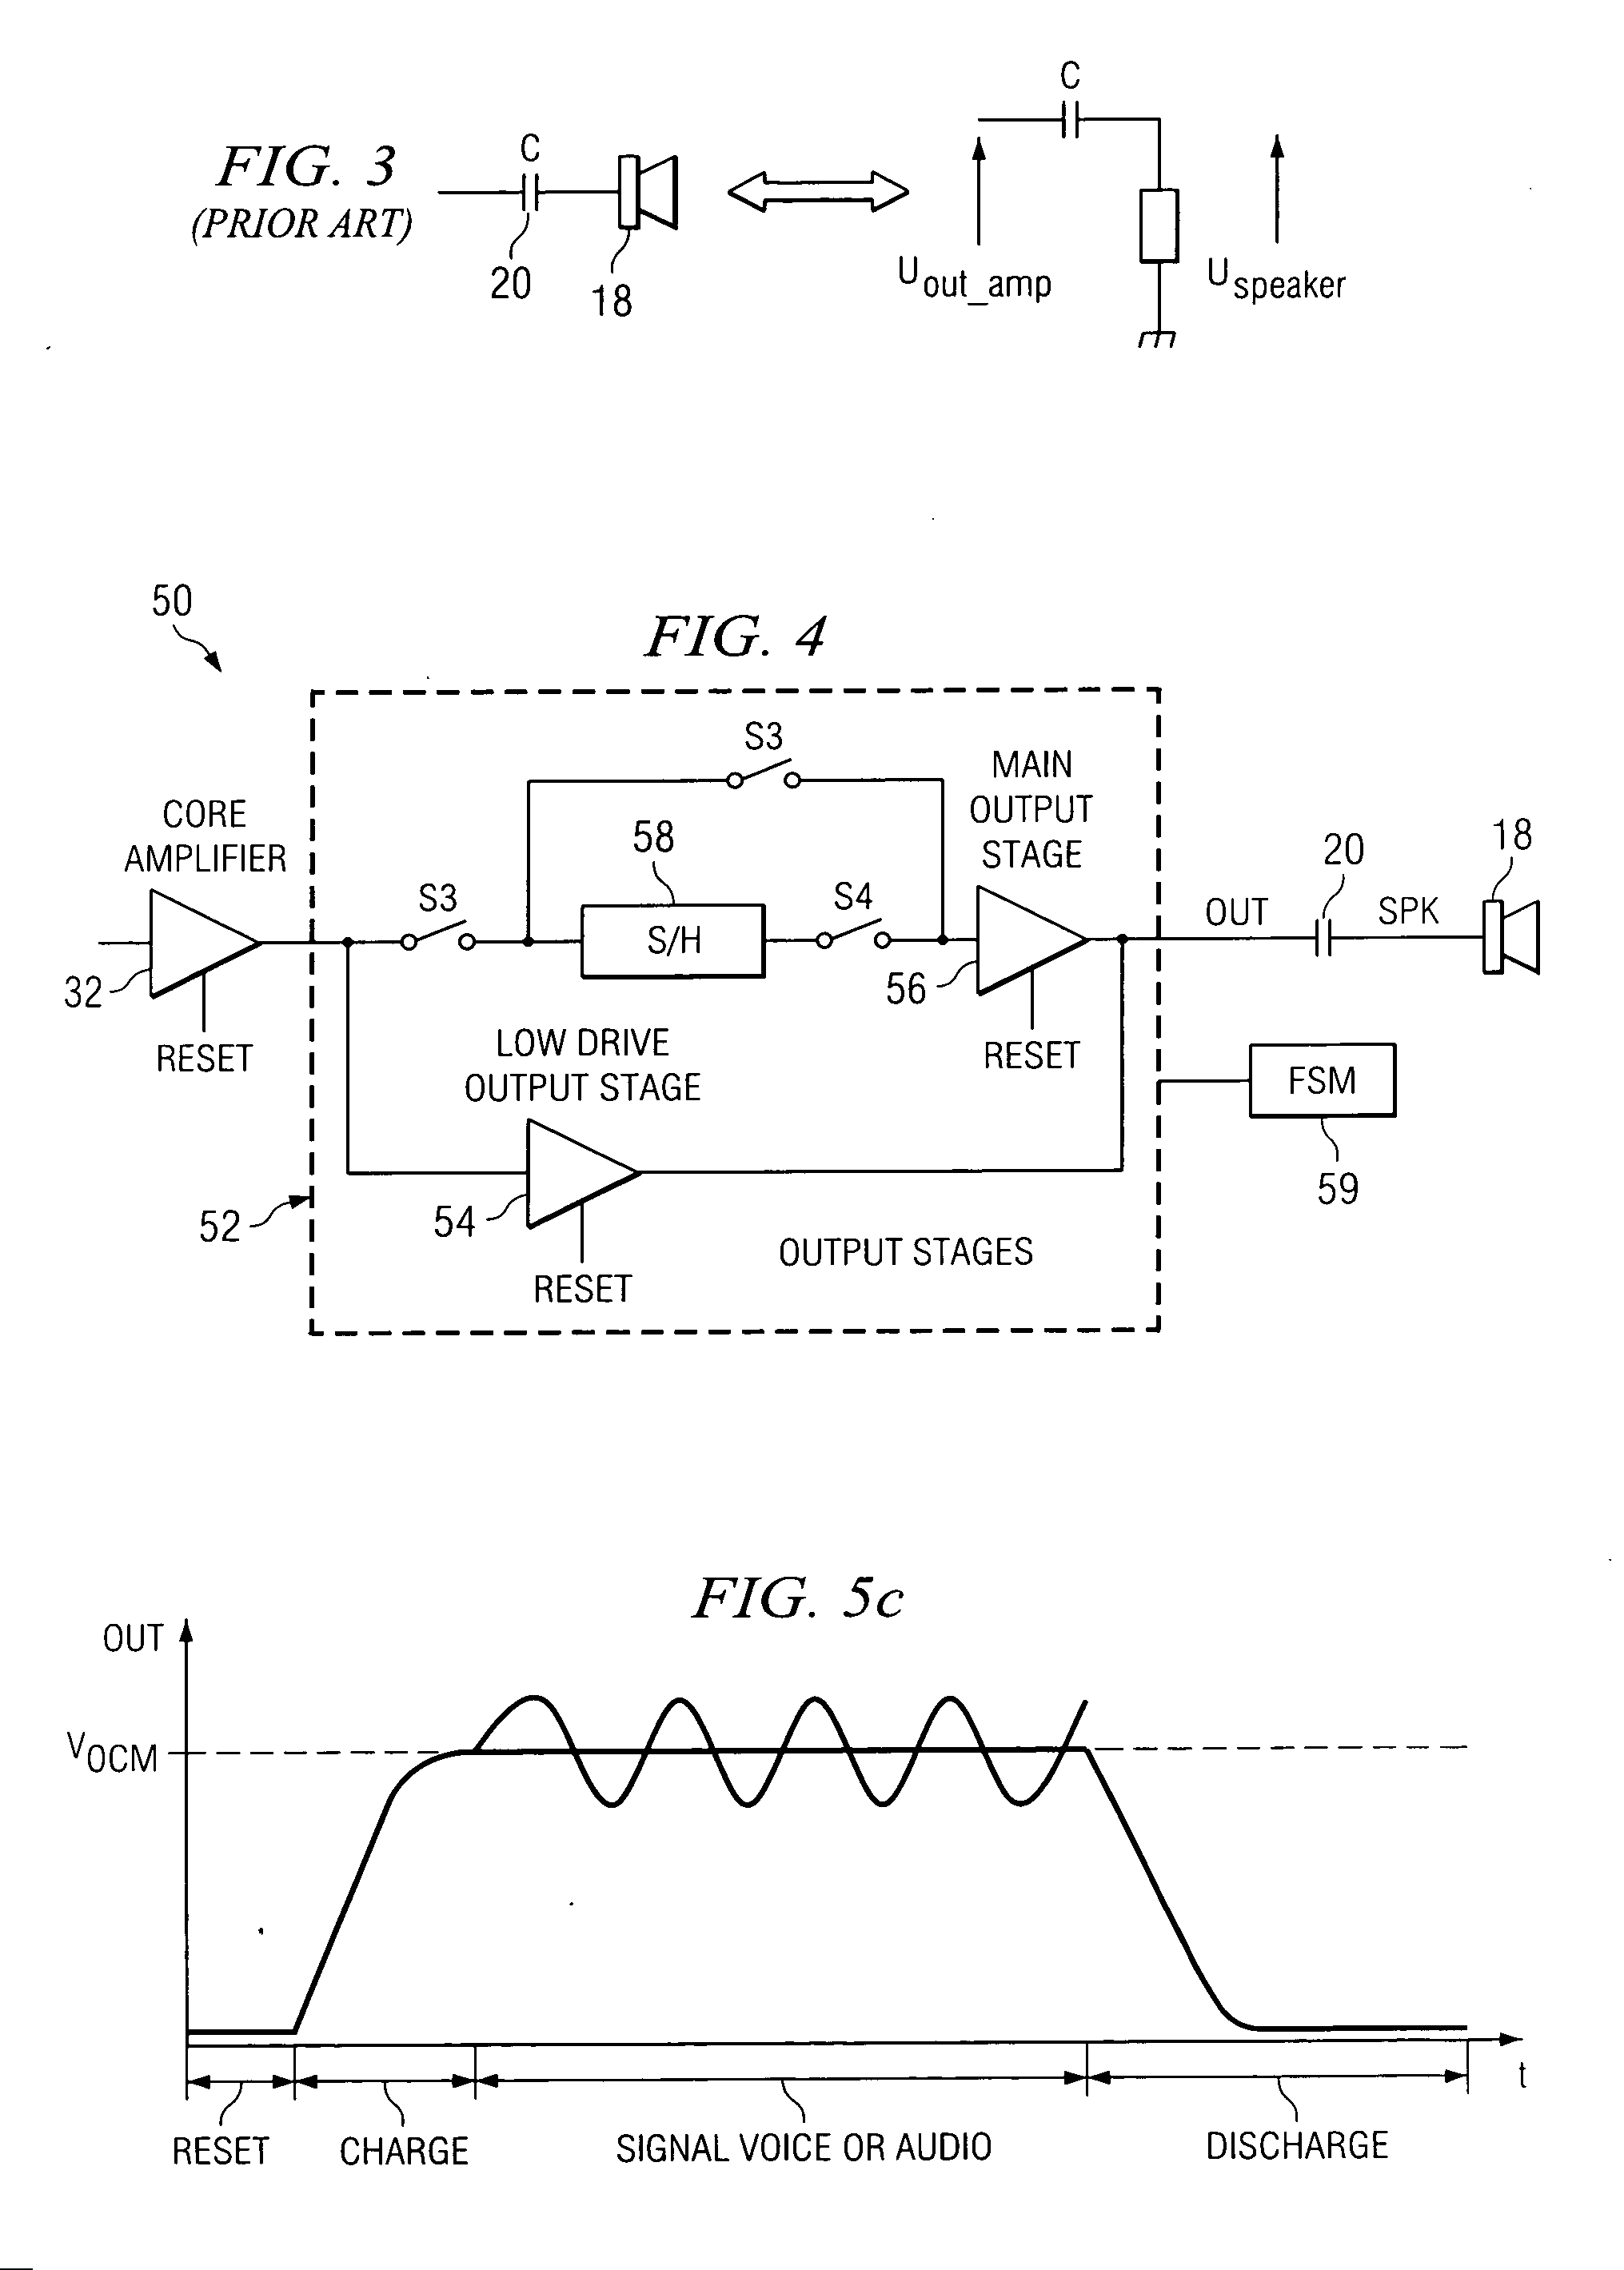 Track and hold circuit to reduce pop noise